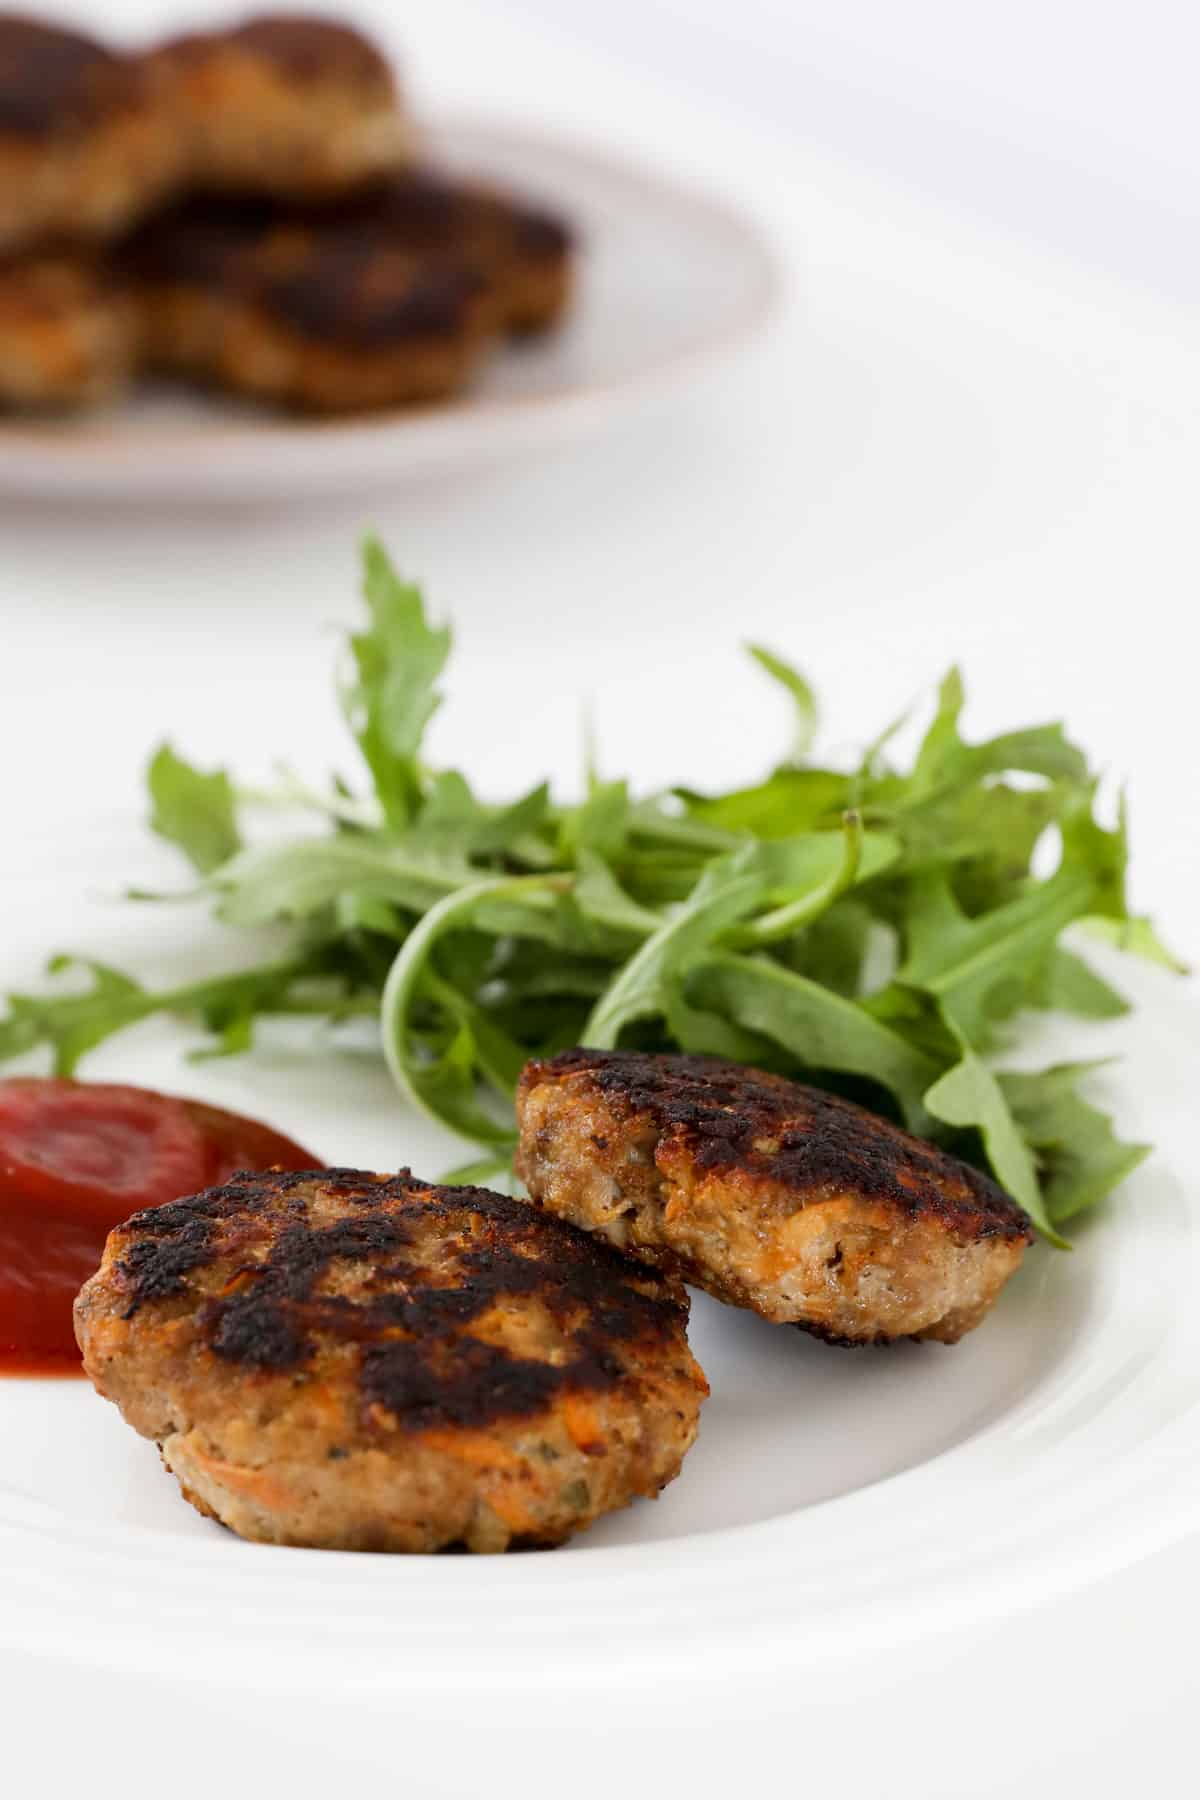 Golden beef rissoles on a plate with rocket and sauce.